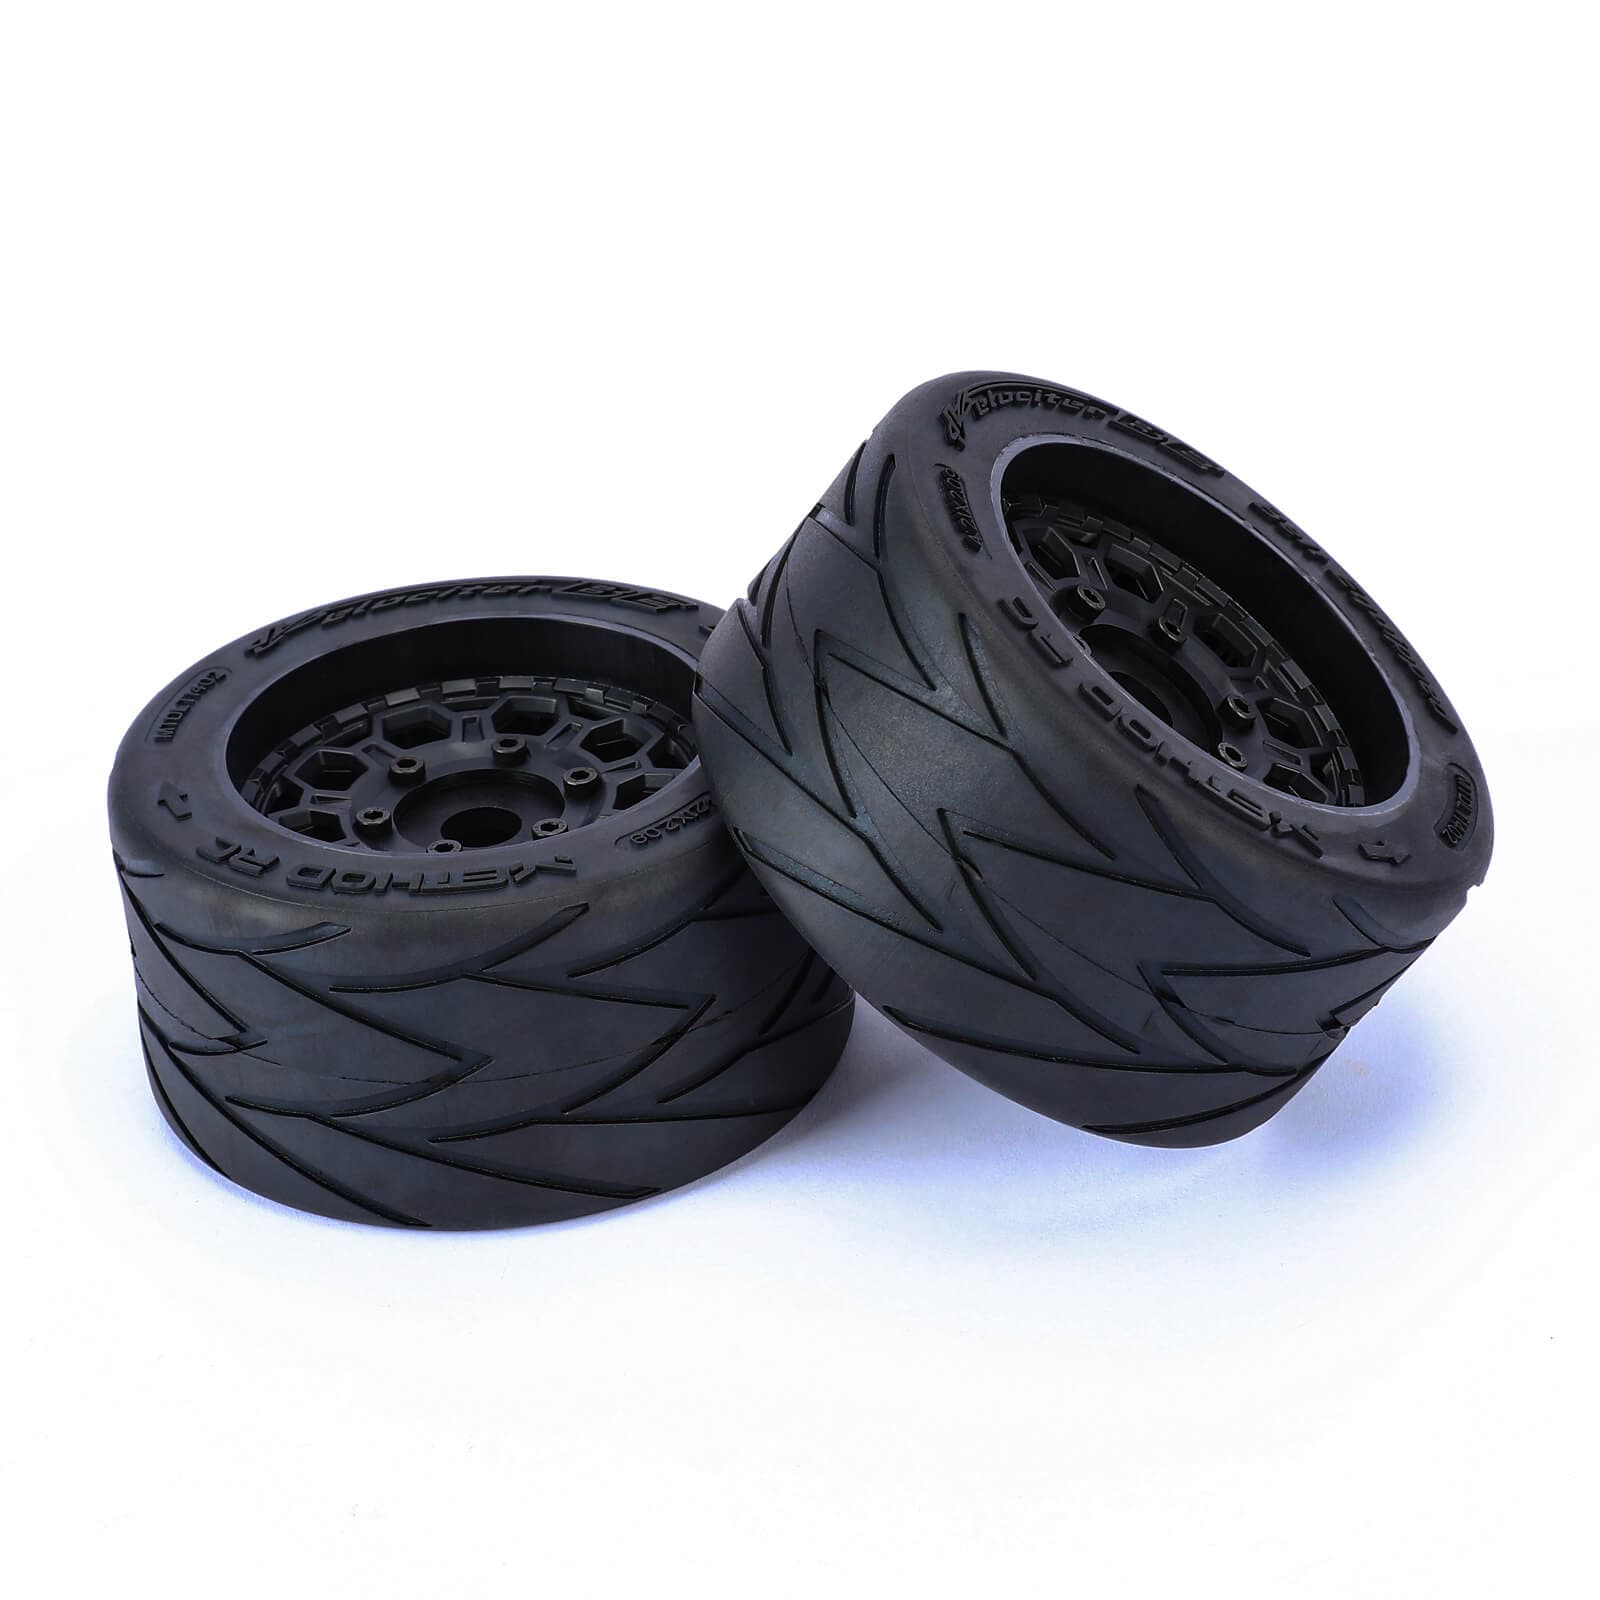 Method RC Tire and Wheel Velociter Belted 1/7th On-Road Tires on Hive 17mm Hex Wheels, Felony Rear, 54/106 (2pcs, Glued)